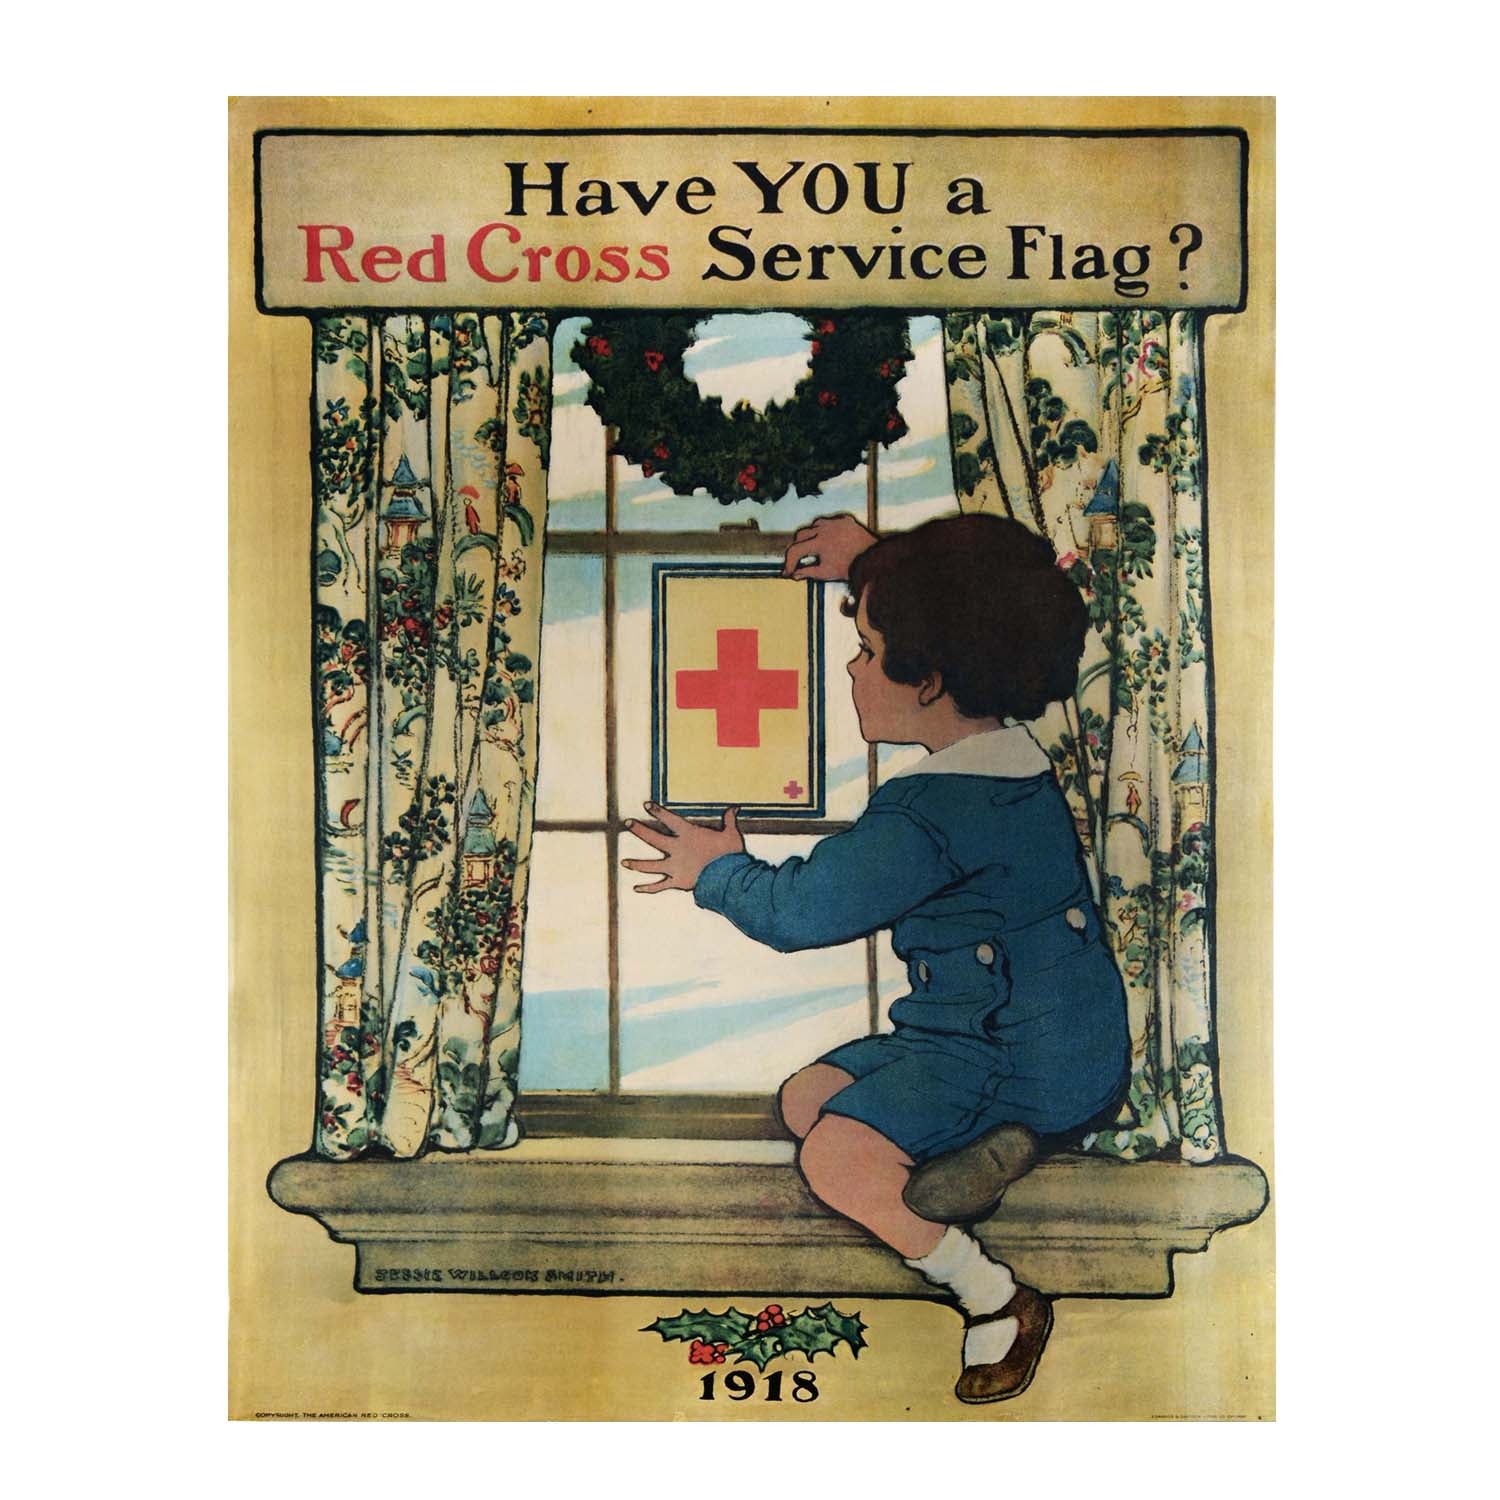 Original First World War era Red Cross poster by illustrator Jessie Willcox Smith, 1918. The design features a little boy folding up the red cross symbol to his window.